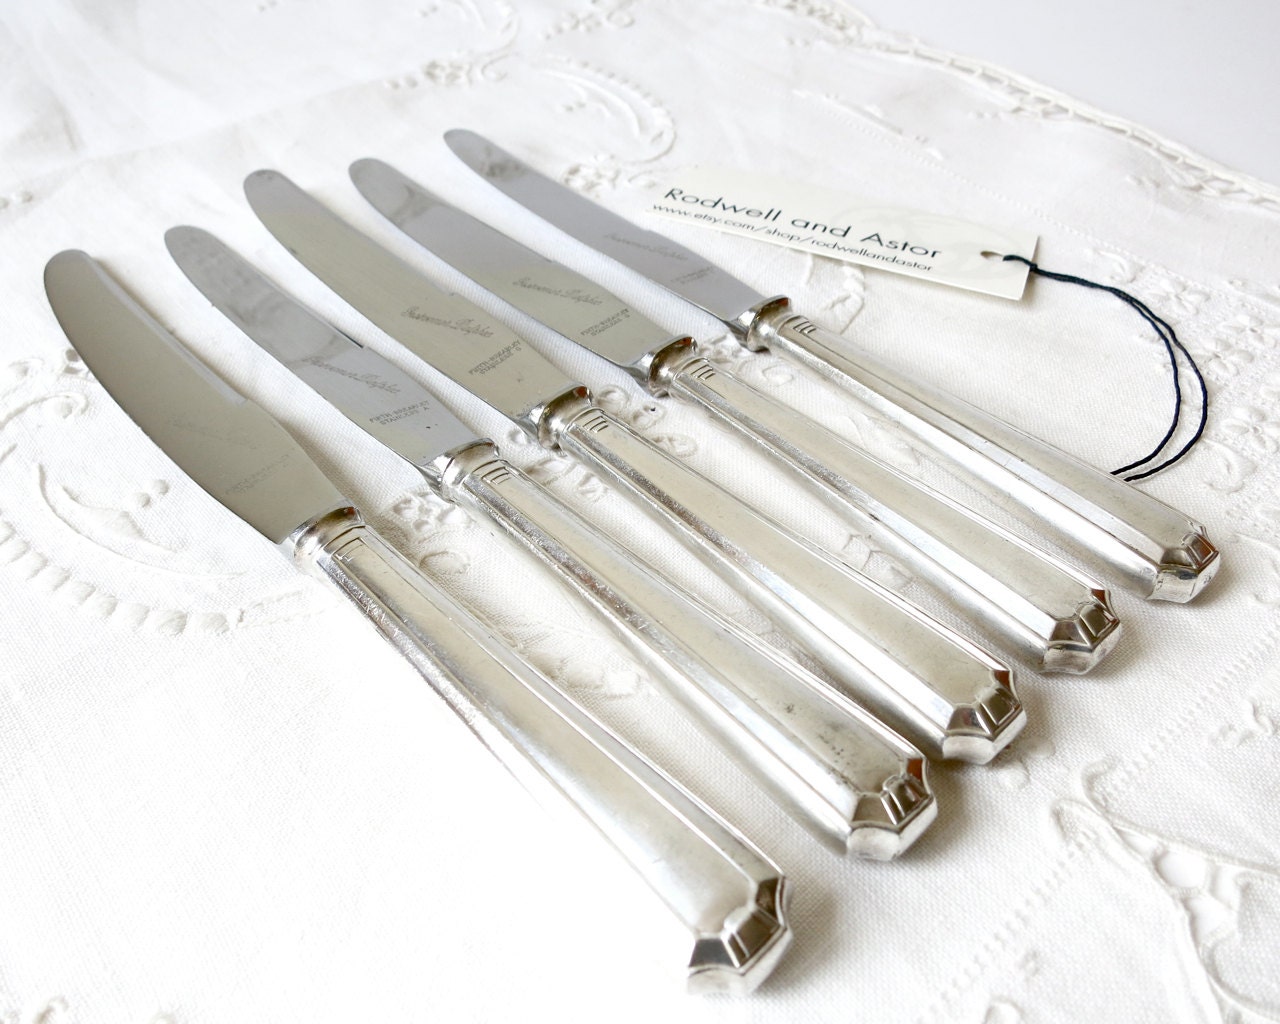 Set 5 Vintage 1950s Grosvenor Delphic Entree Knives. Art Deco Stainless and Silver Plate (Free Postage in Australia)